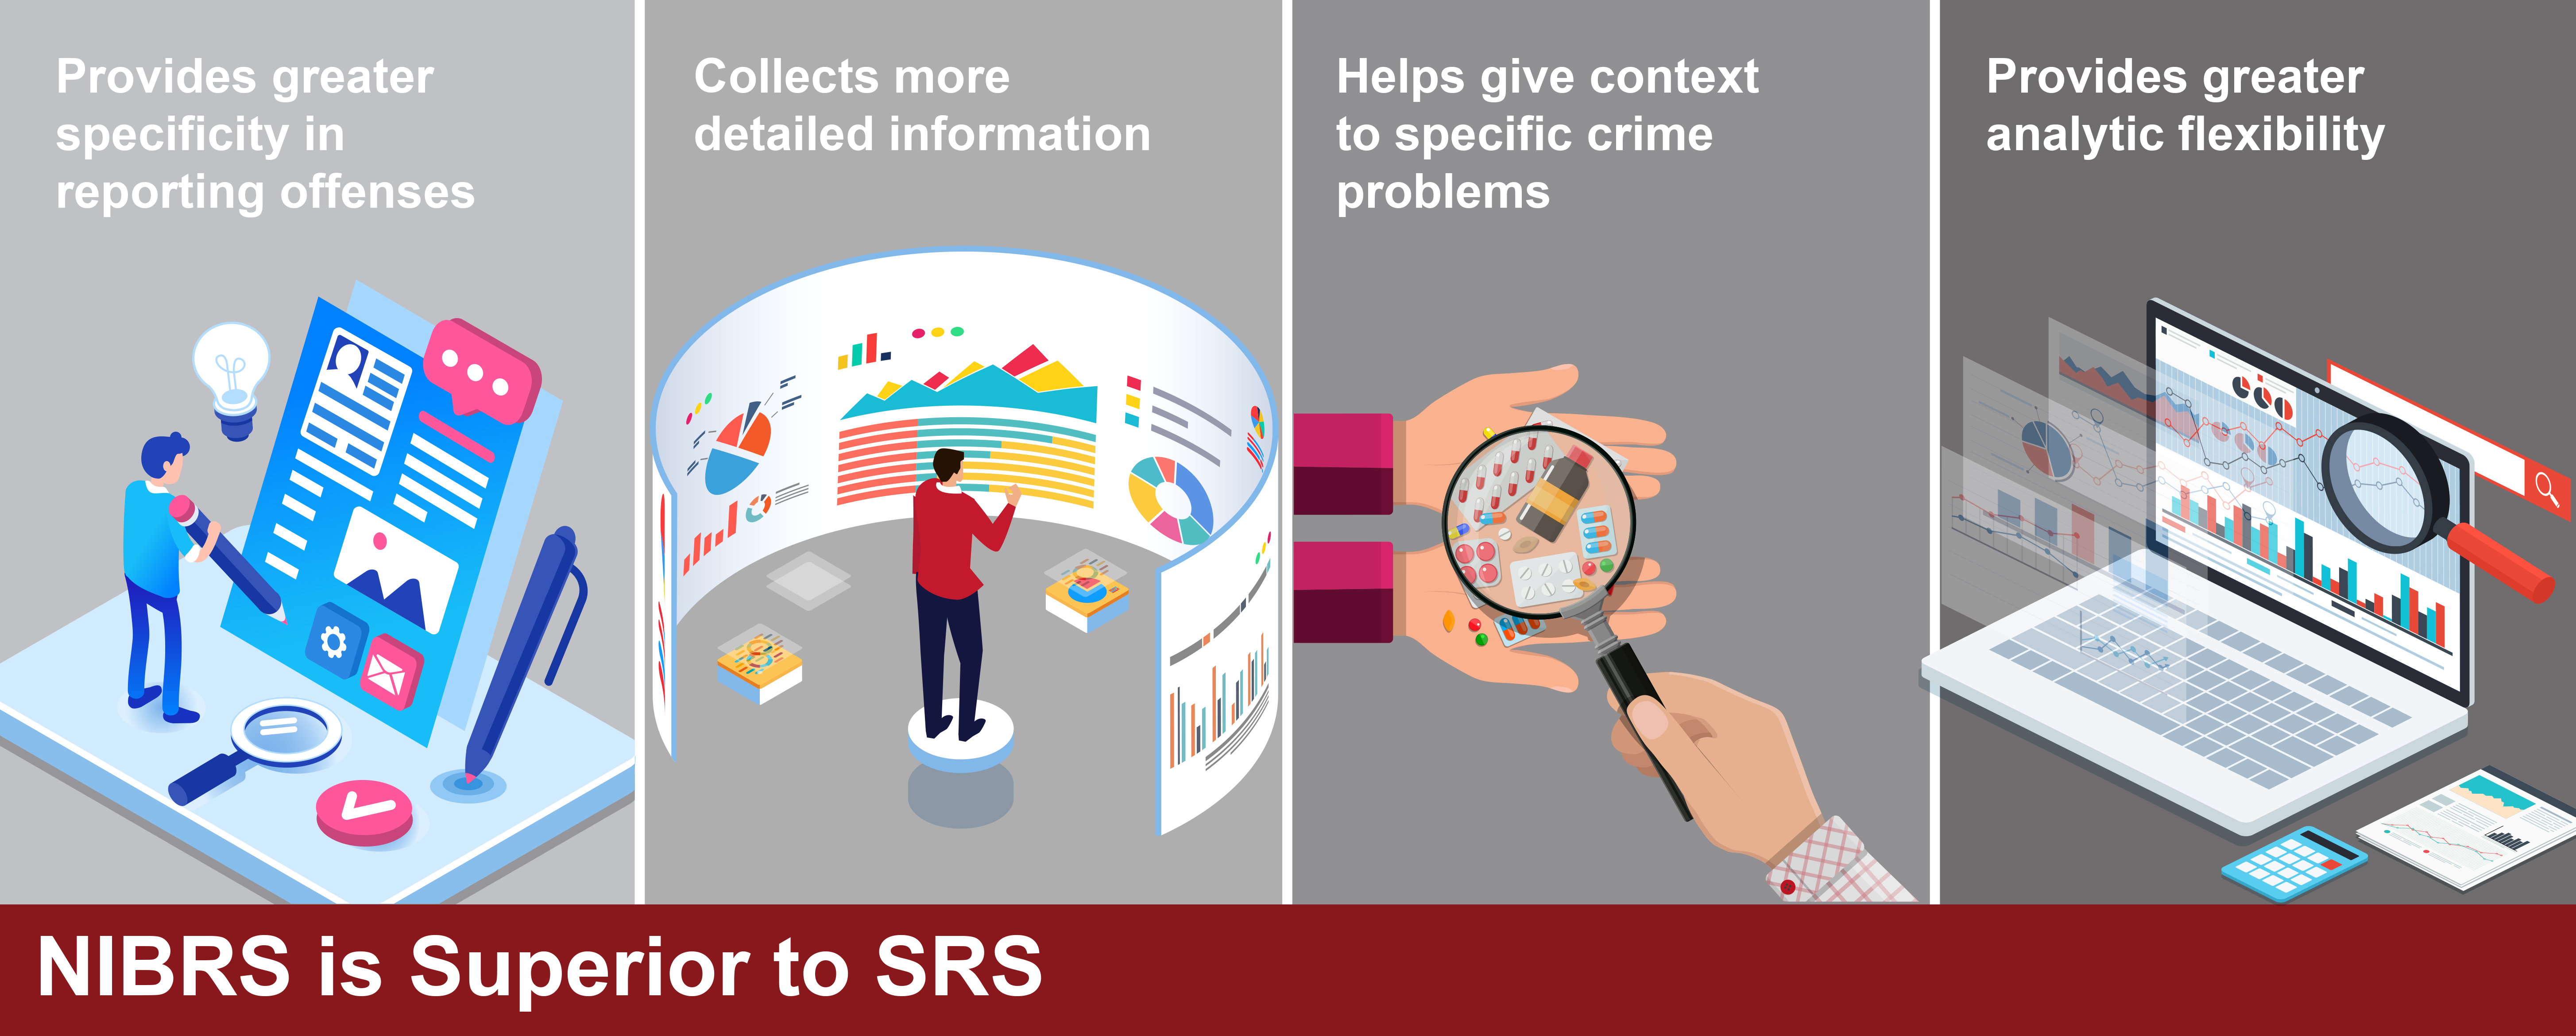 NIBRS Superior to SRS Infographic